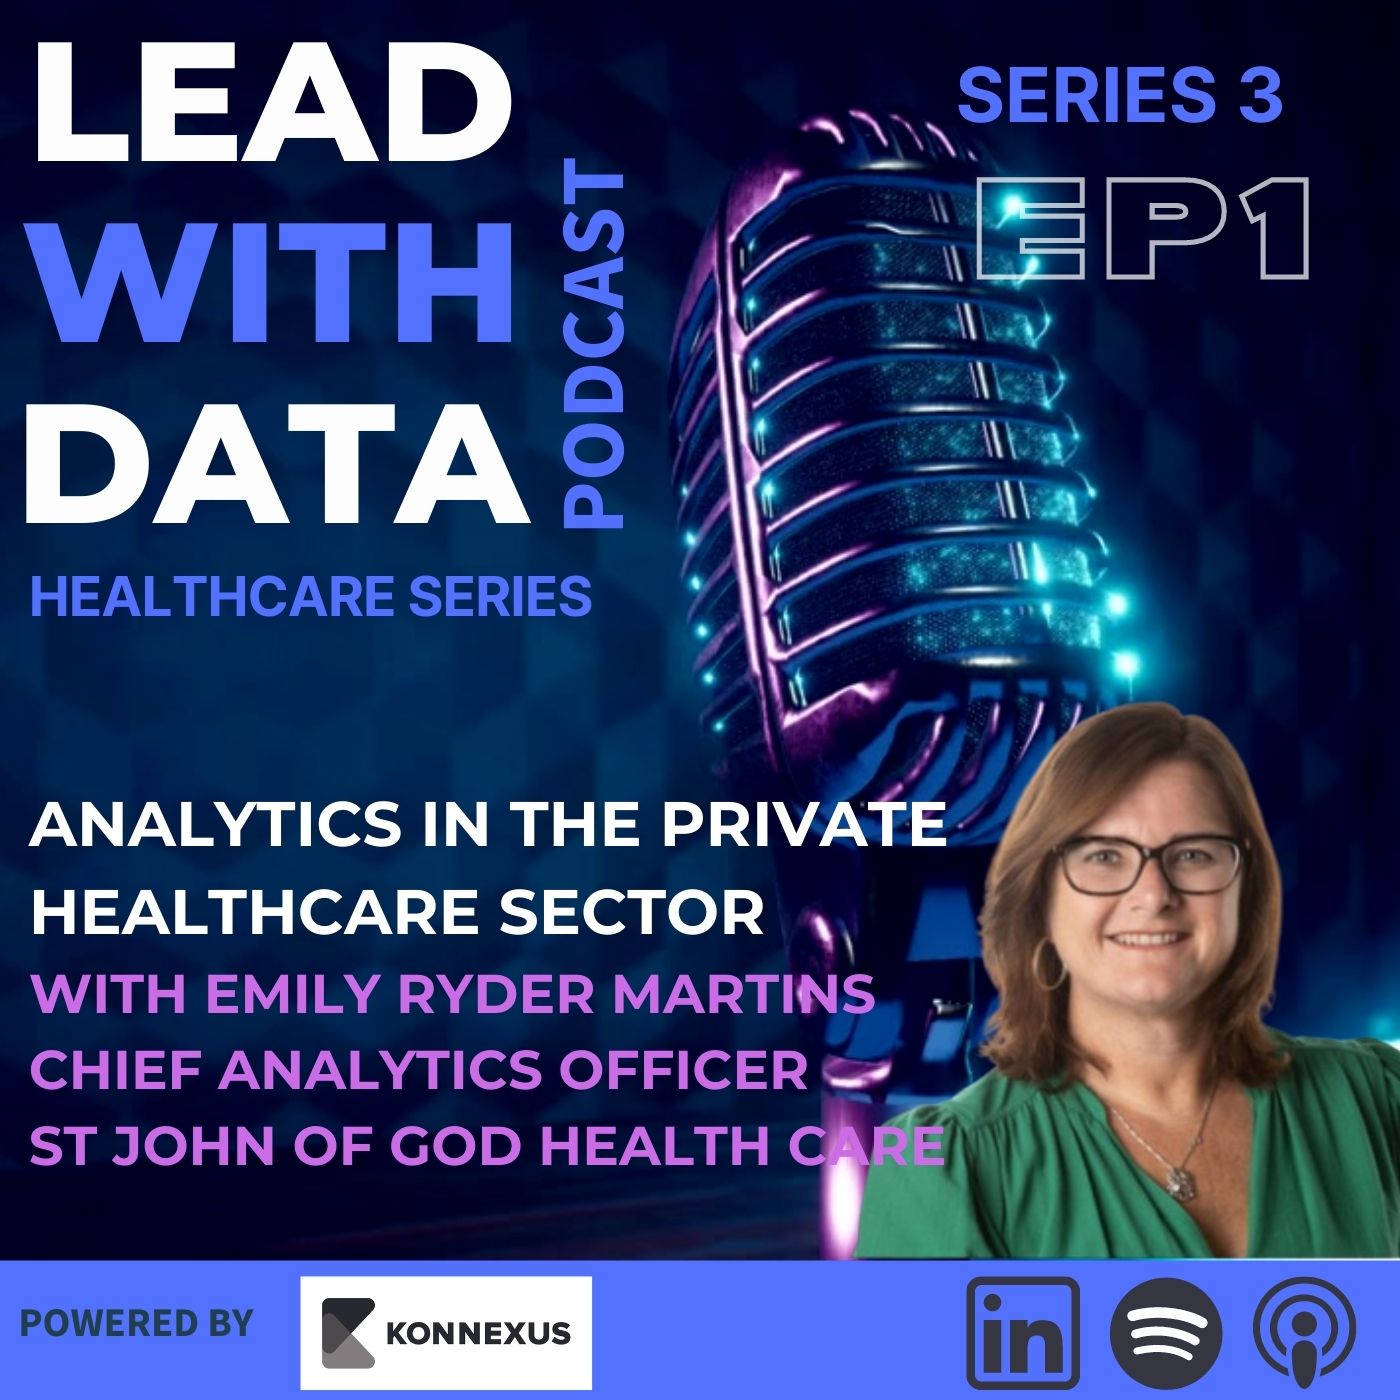 Season 3 - Episode 1 - Health Care Series - Analytics in the private healthcare sector